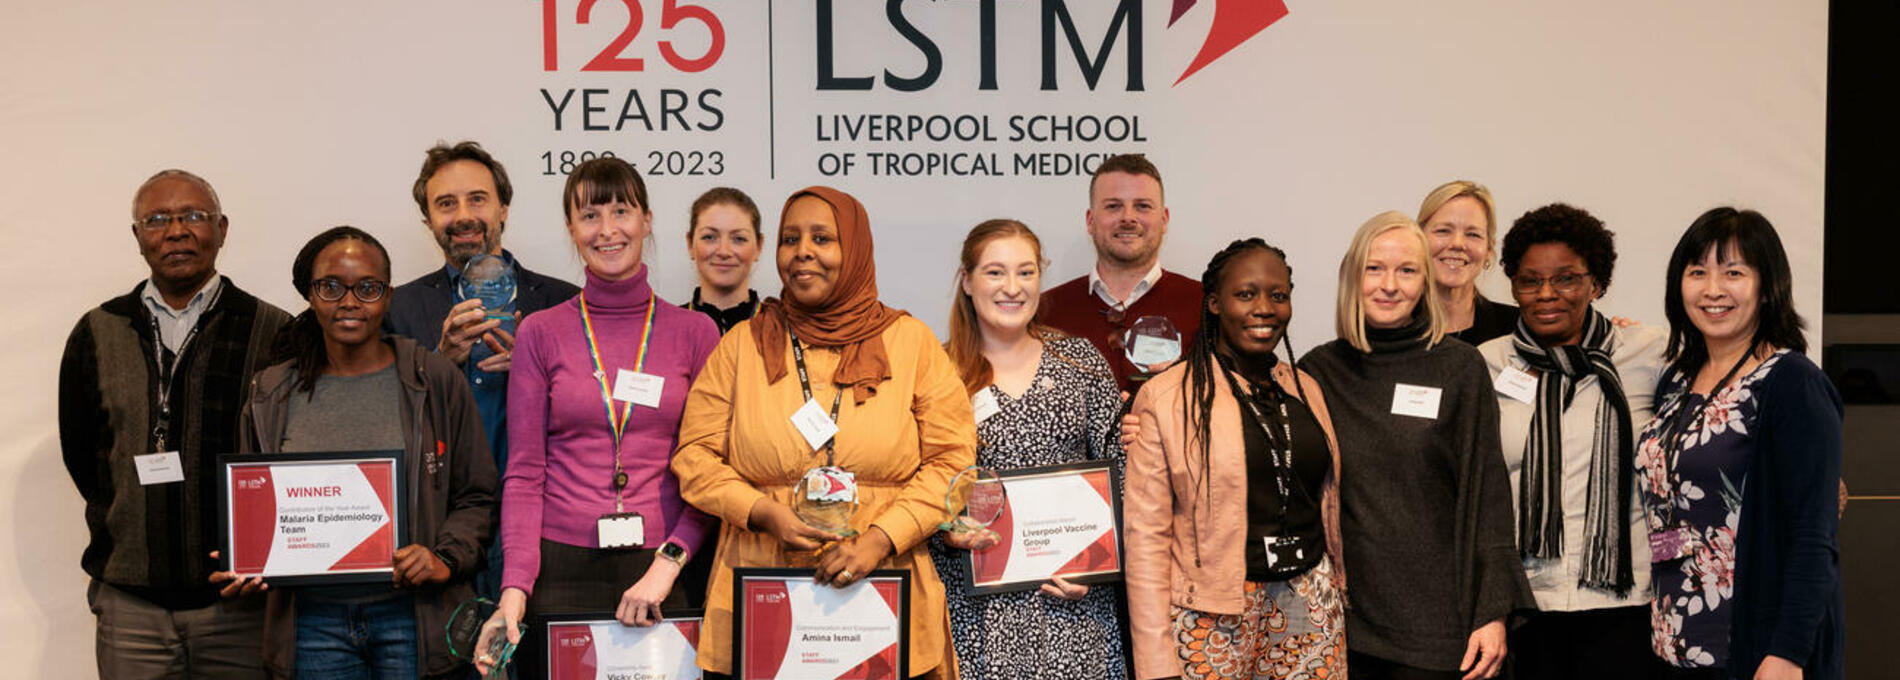 Image of award winners standing in front of the LSTM logo